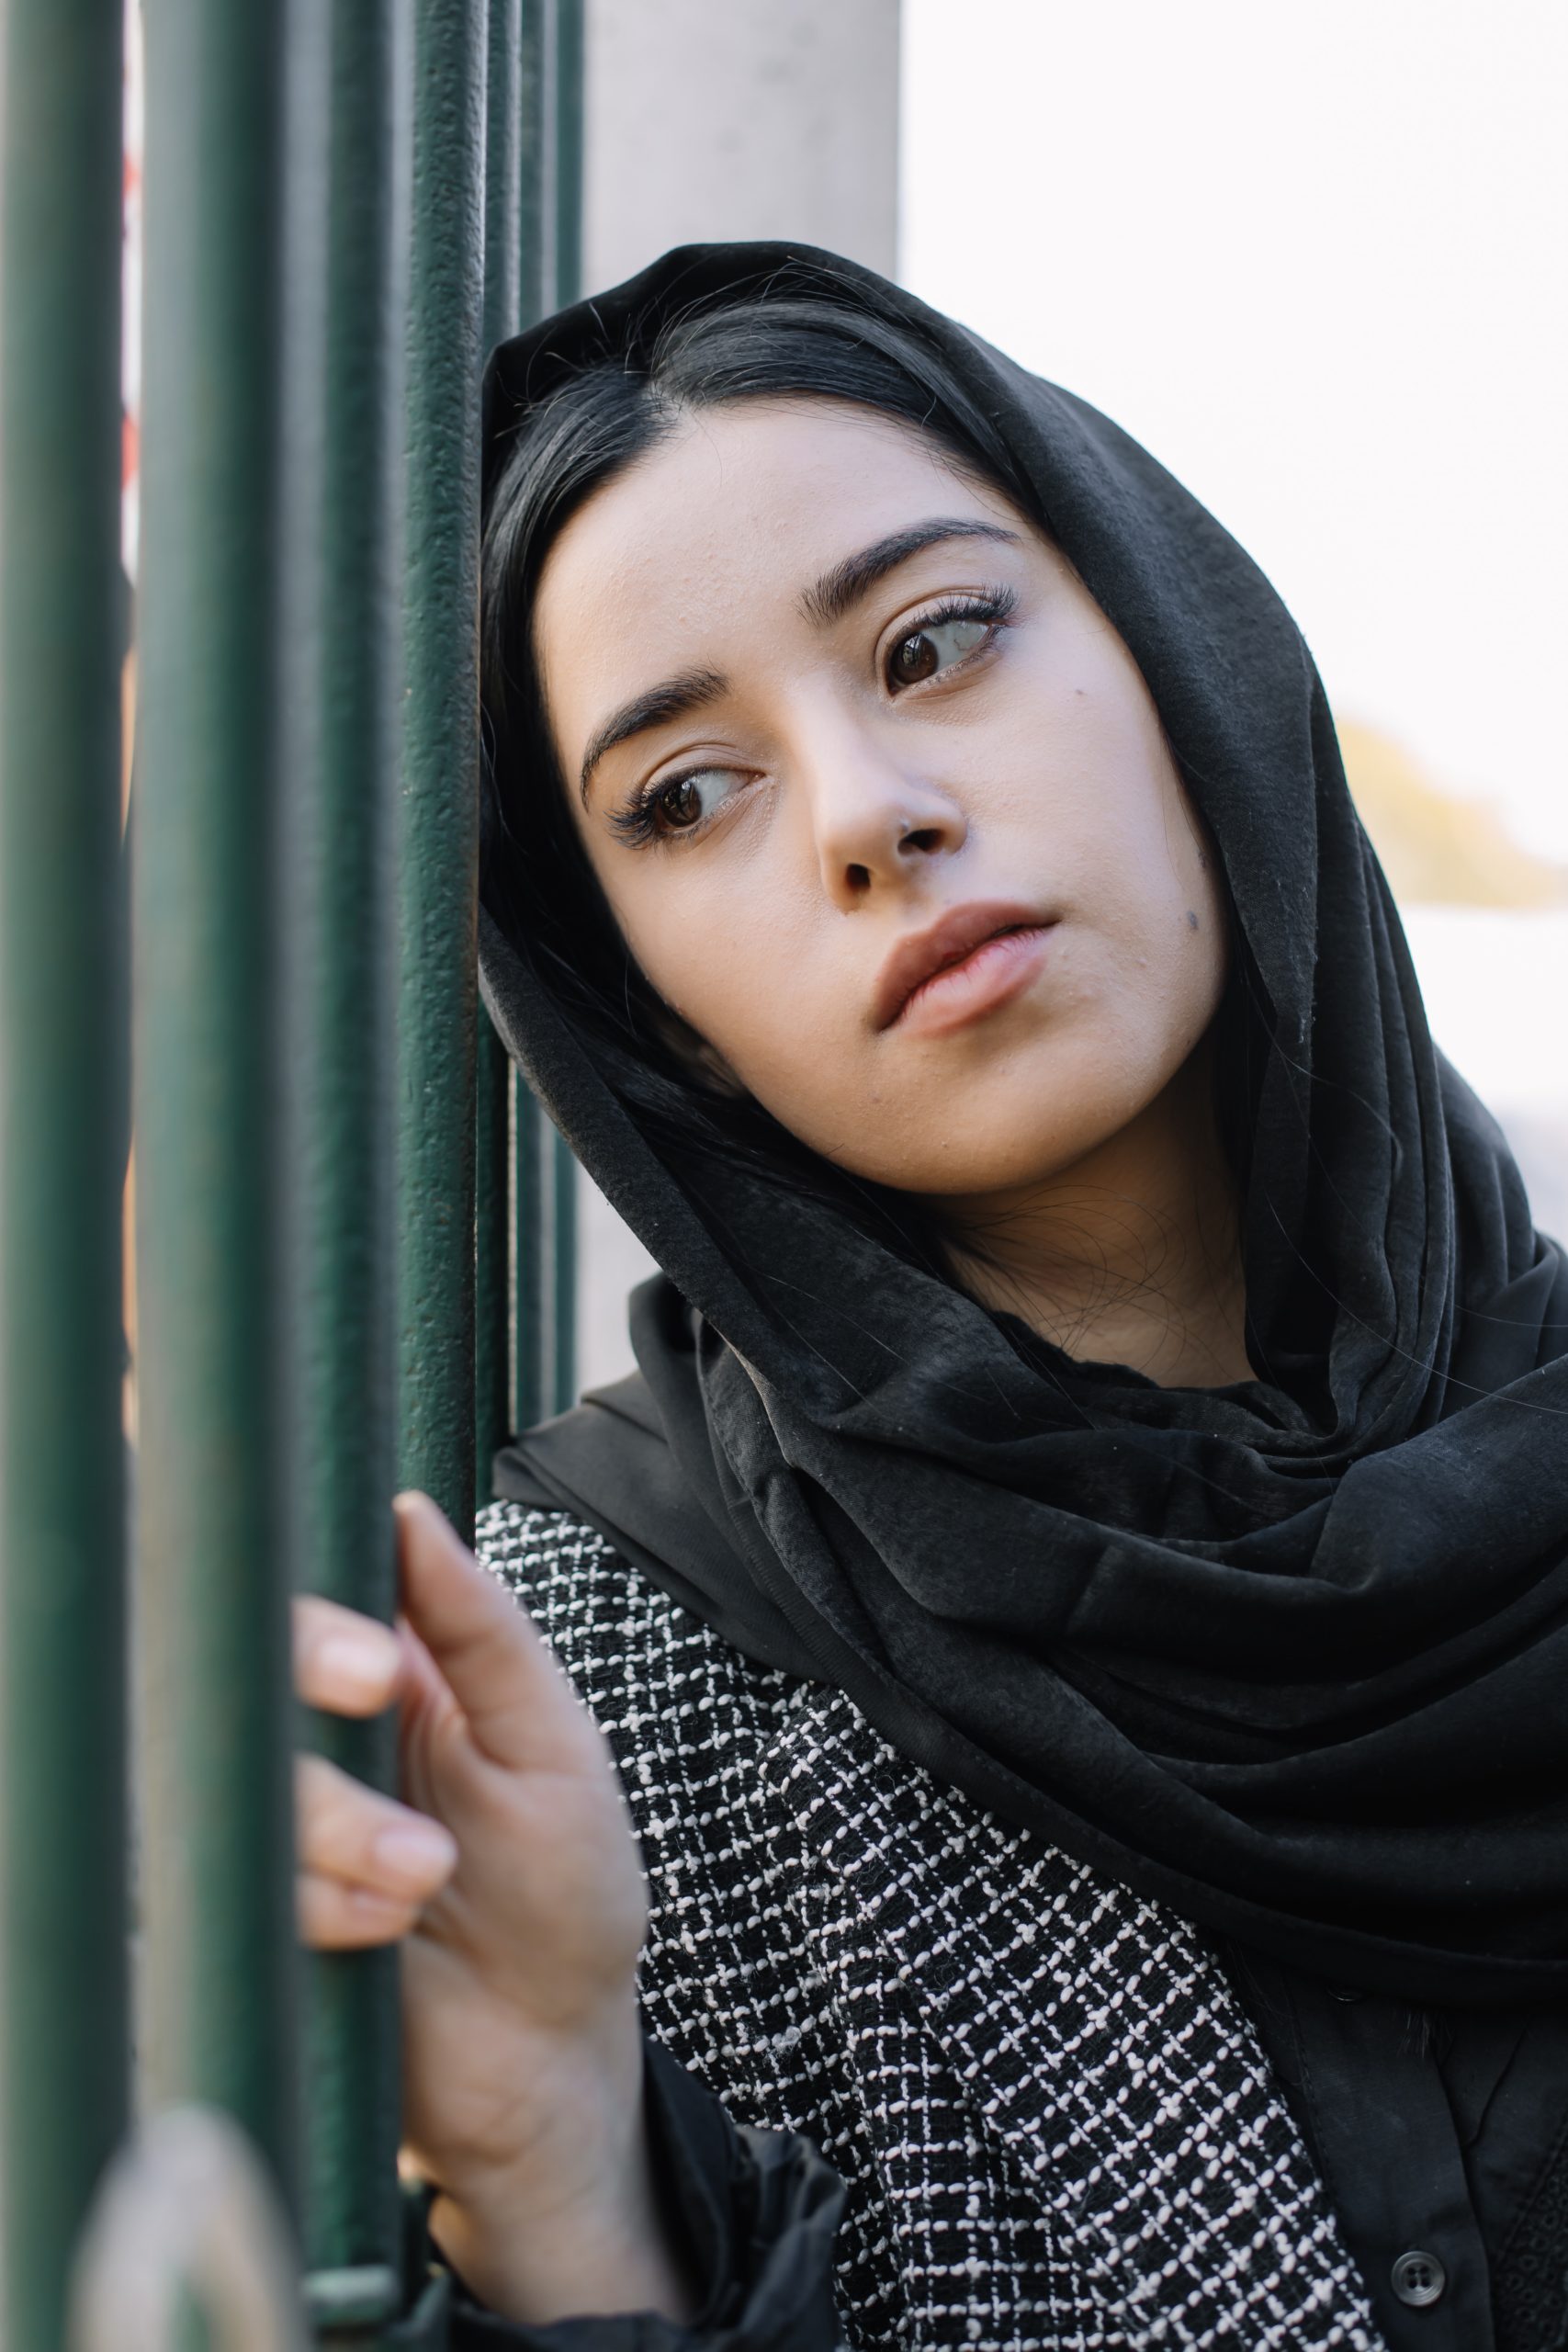 Serious woman in headscarf near fence